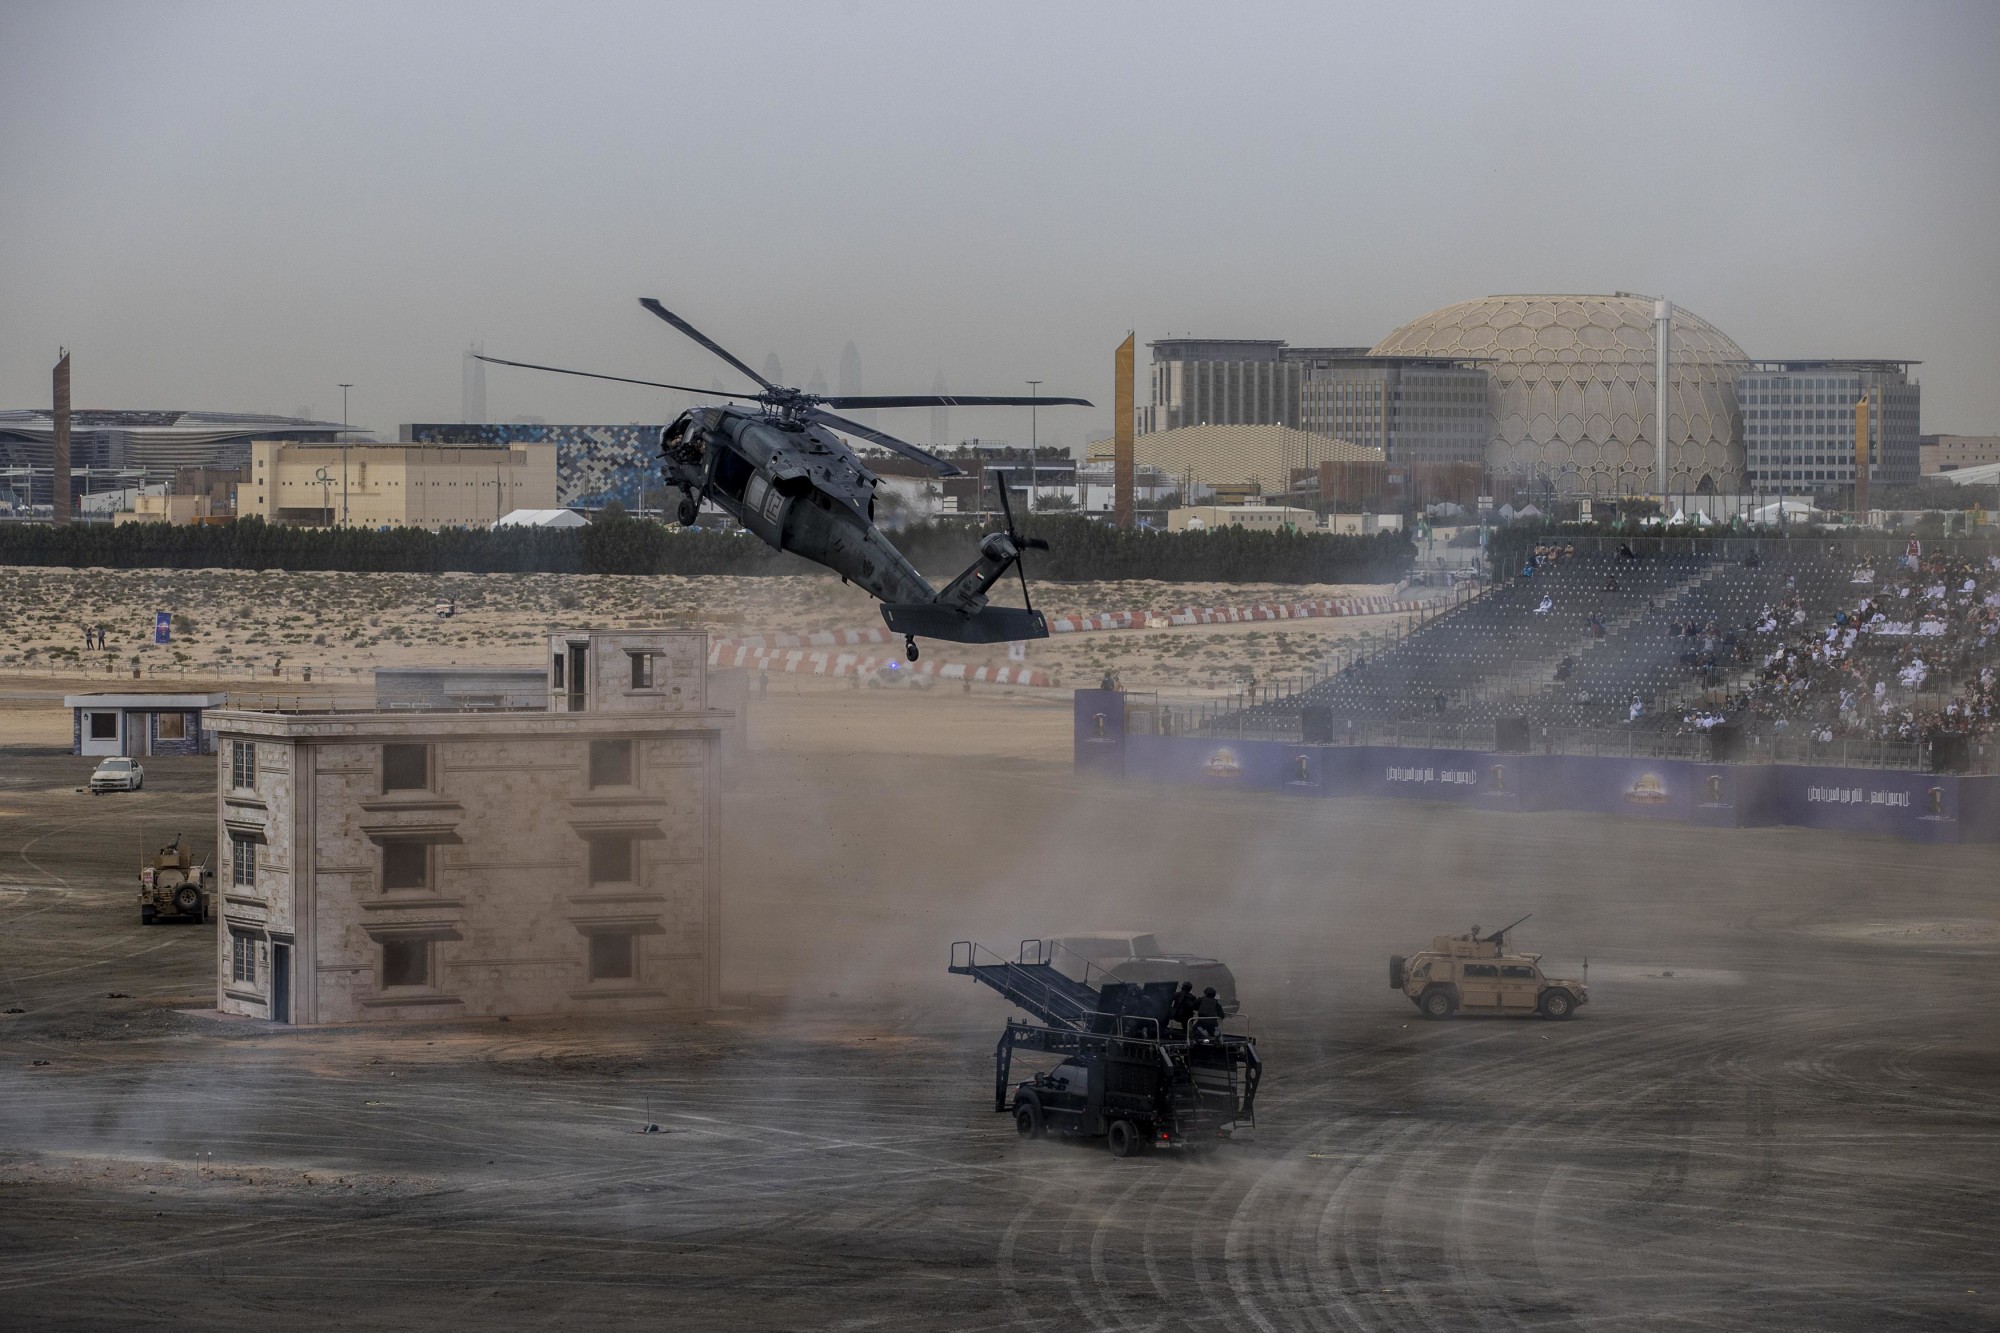 Union Fortress 8, The UAE Multi-Force Military Demonstration takes place near Expo 2020 Dubai m59061